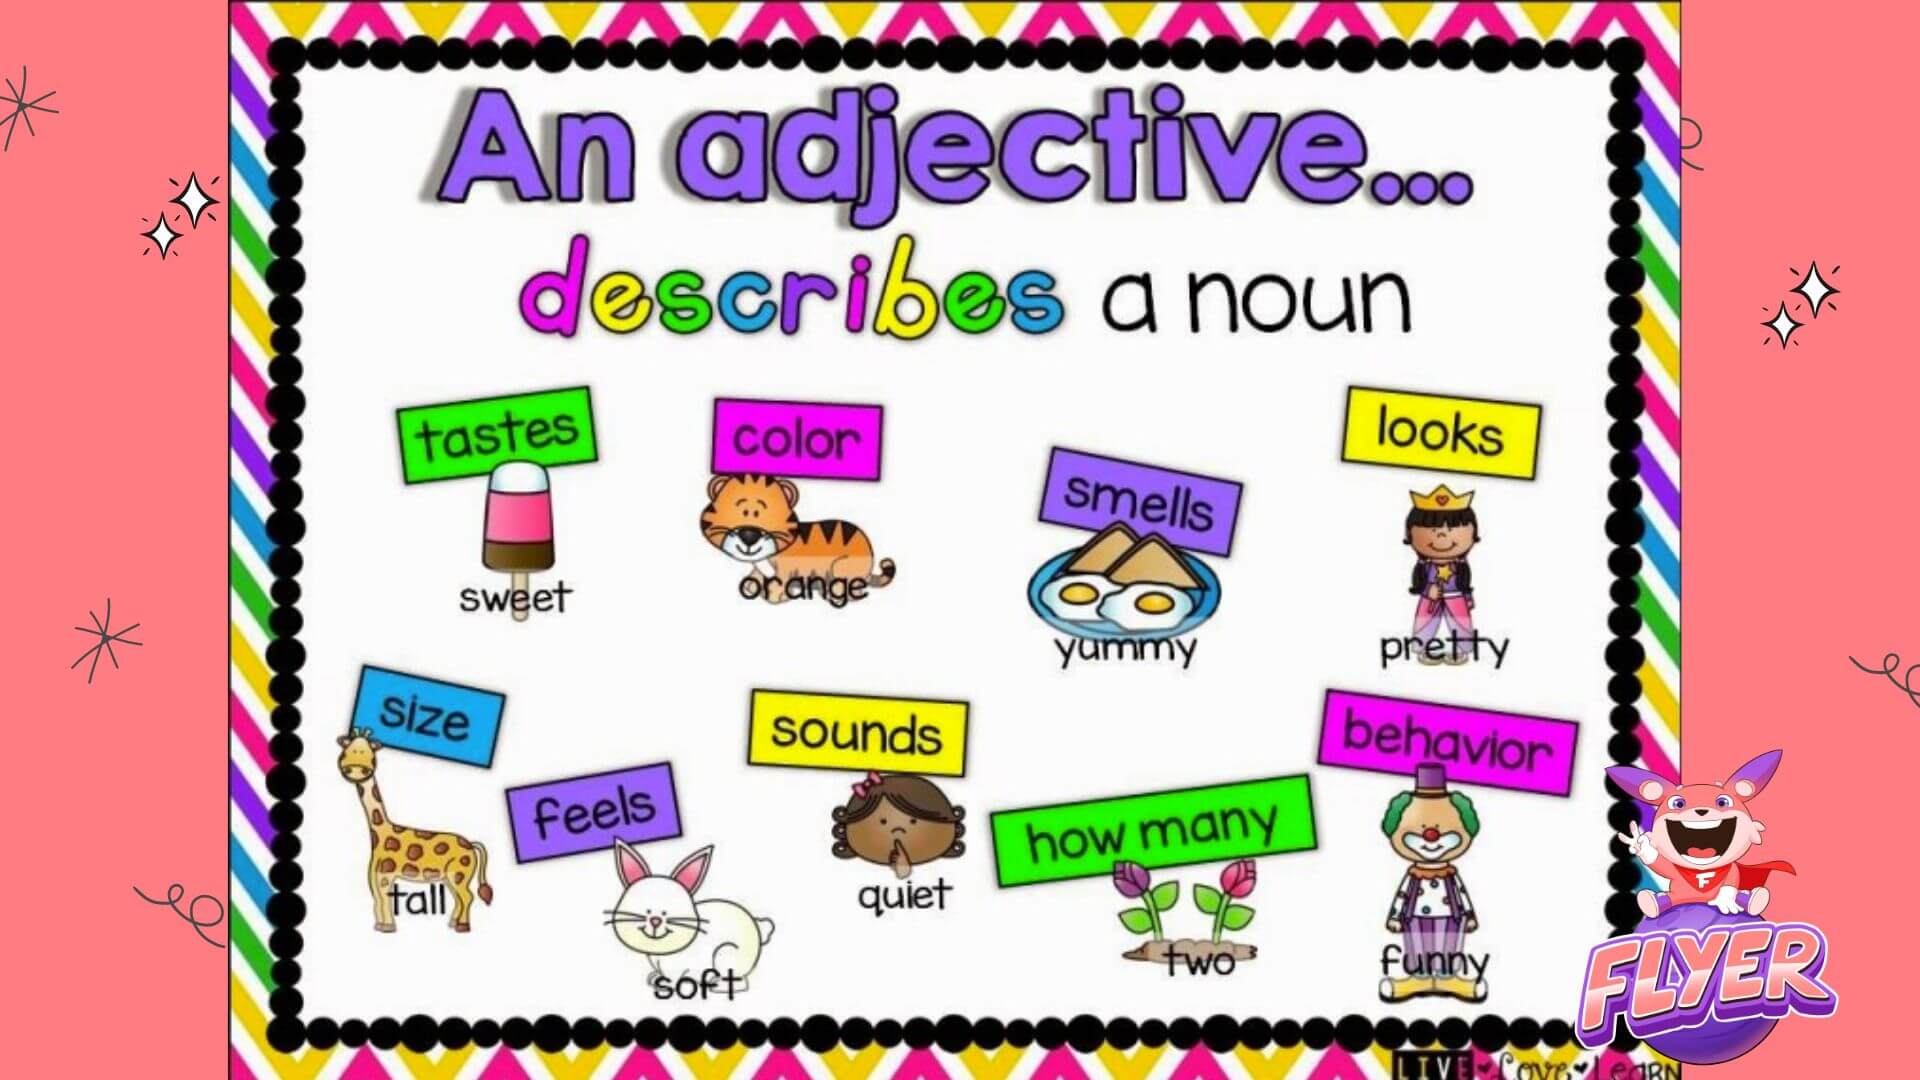 Nouns pictures. Adjectives. Adjectives картинки. Adjectives урок. English for Kids.